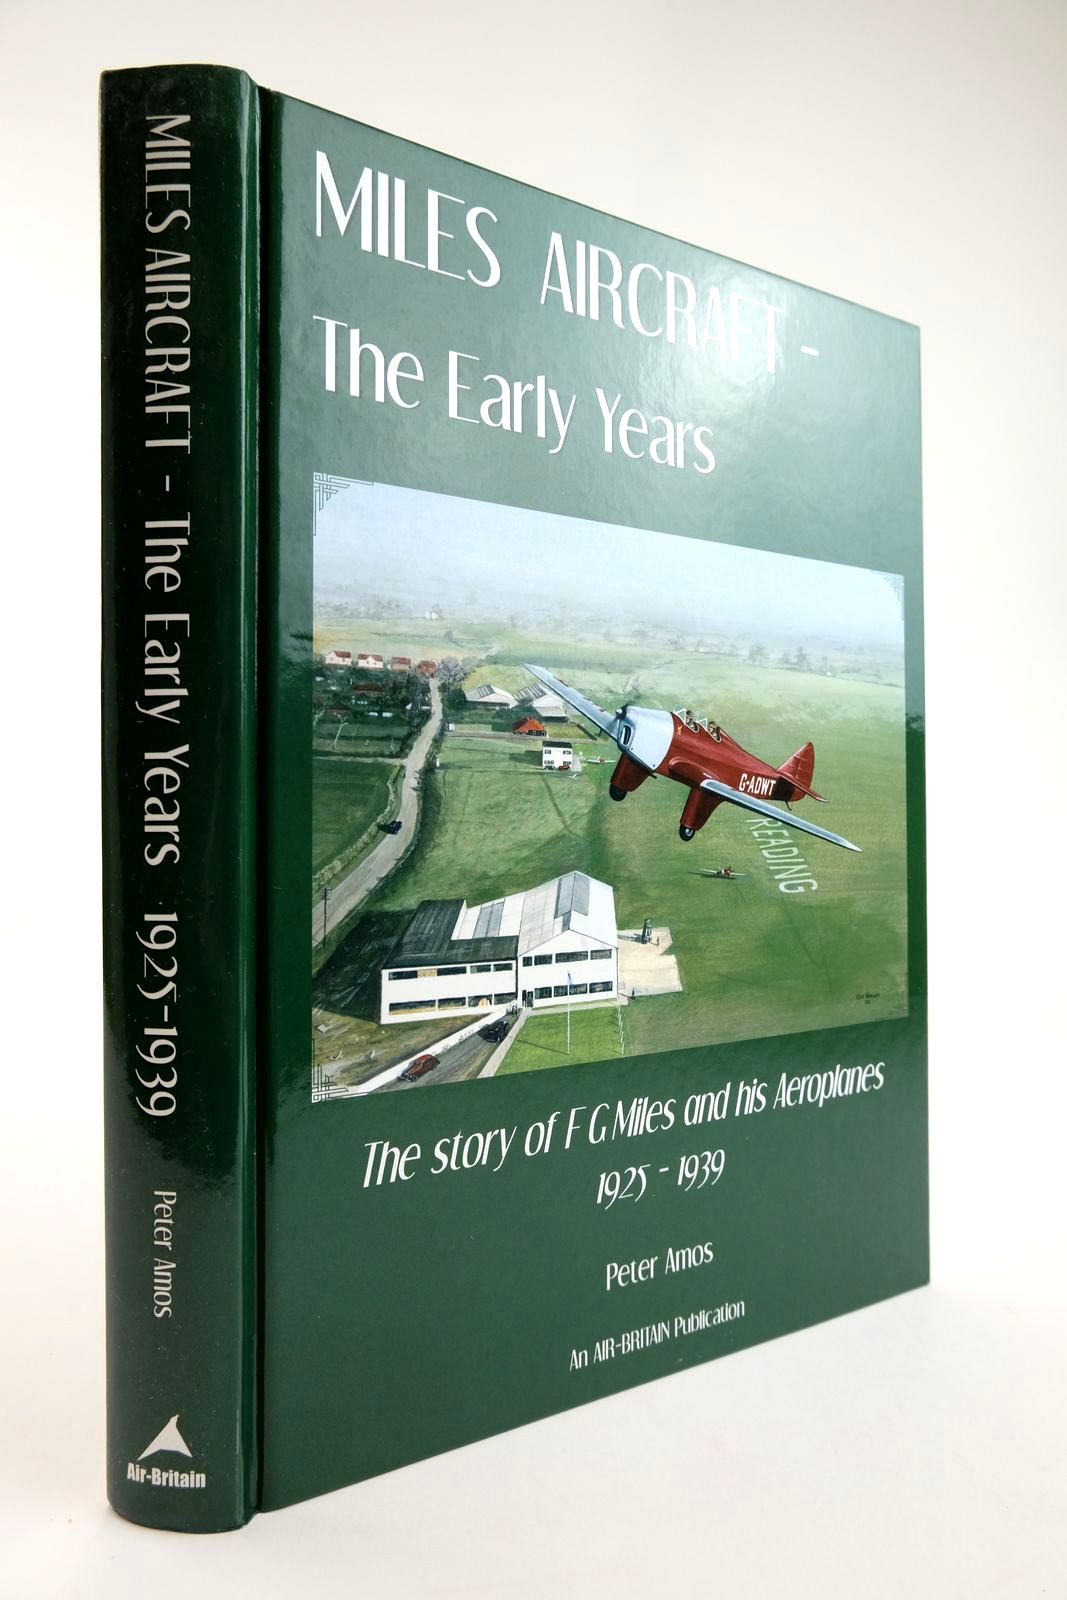 Stella & Rose's Books : MILES AIRCRAFT THE EARLY YEARS: THE STORY OF F ...